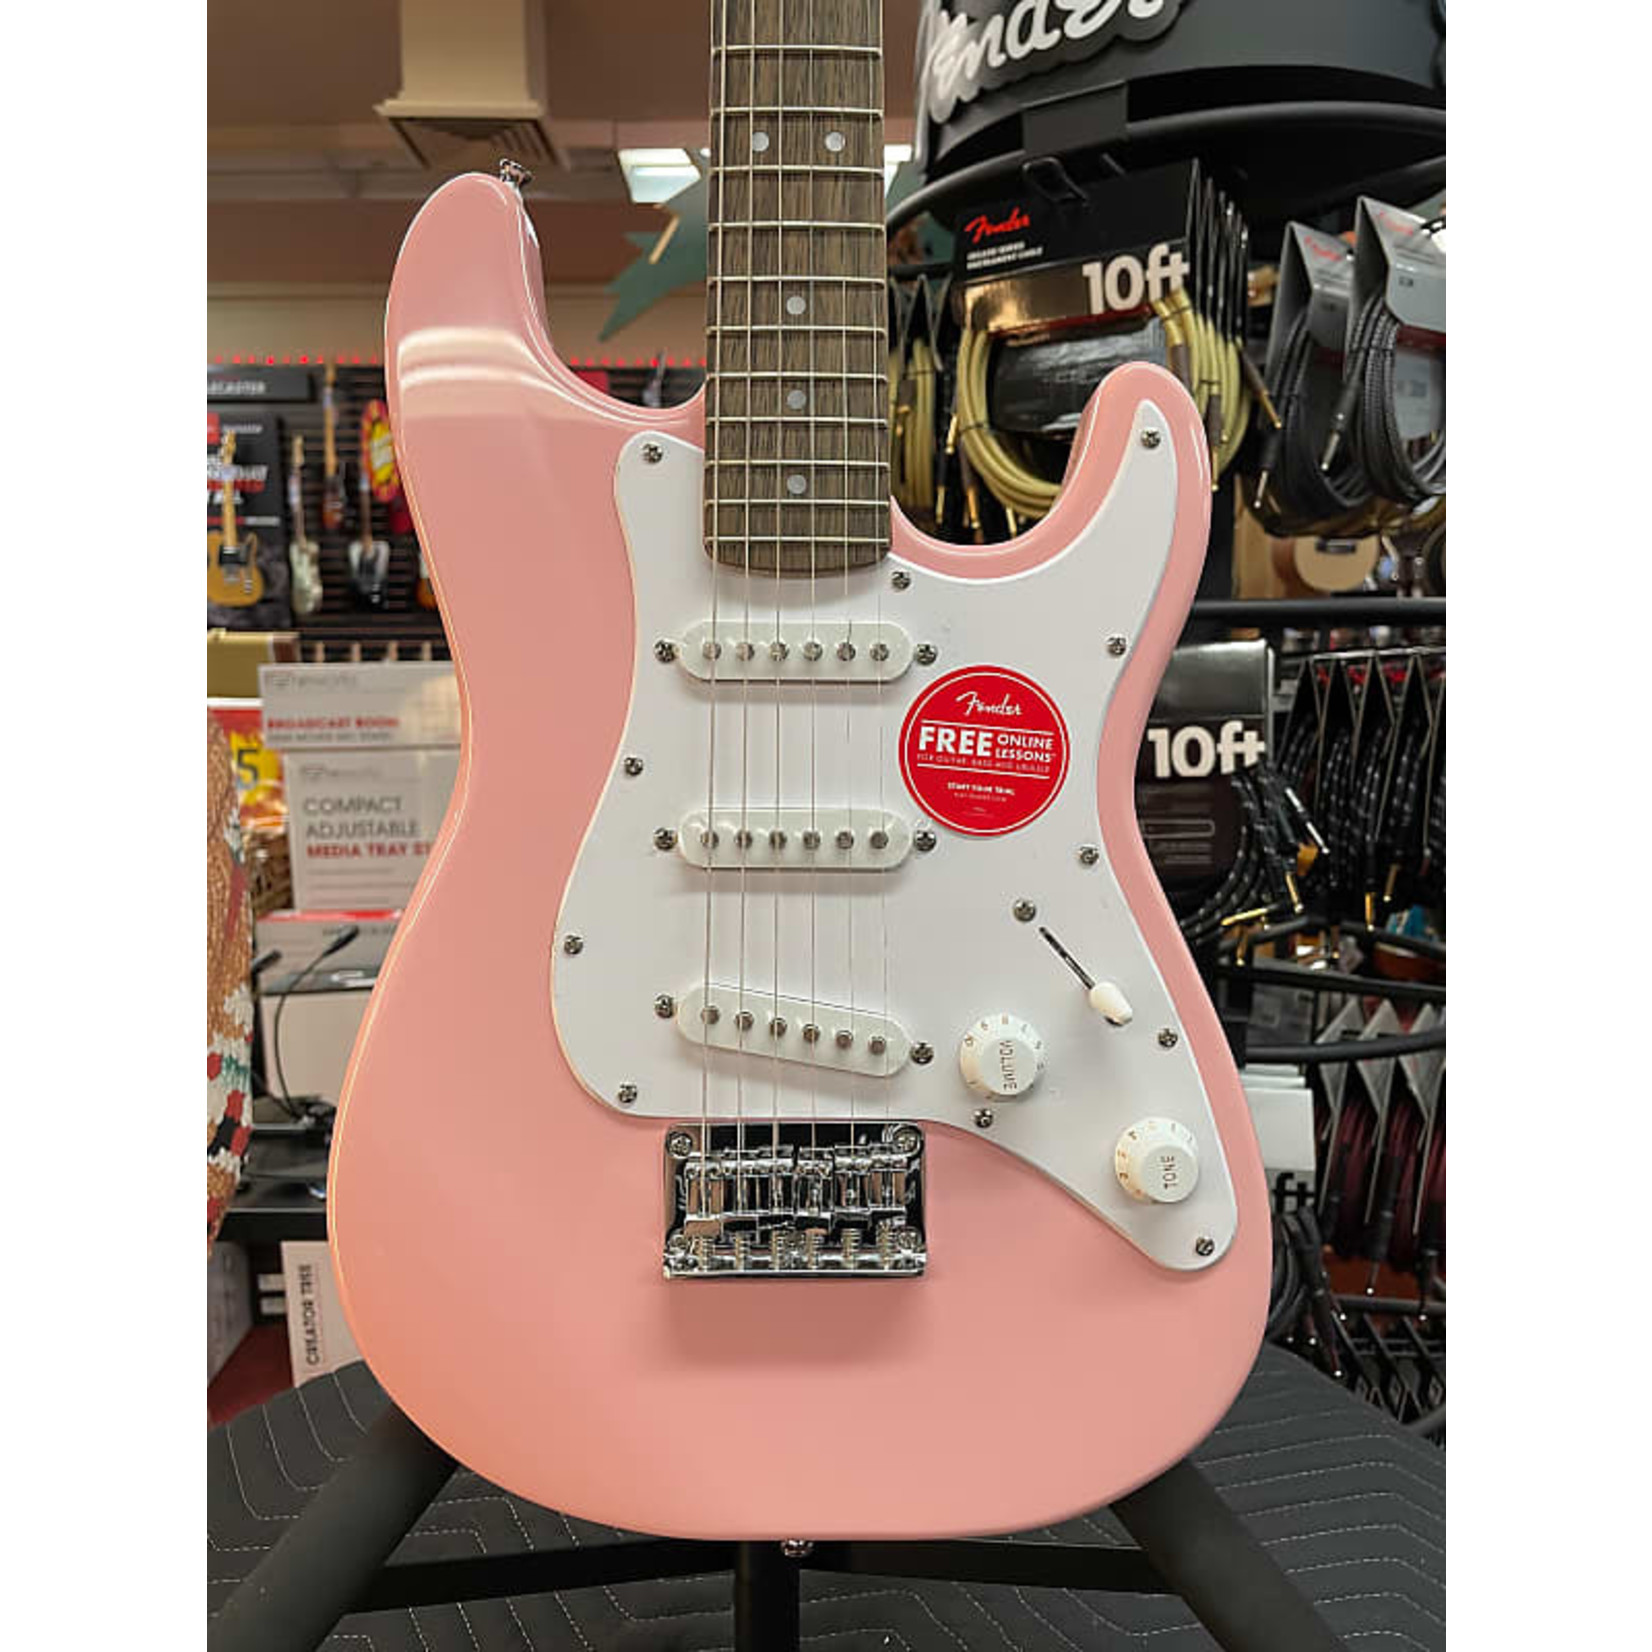 Squier ON SALE-Squier Mini Stratocaster Shell Pink